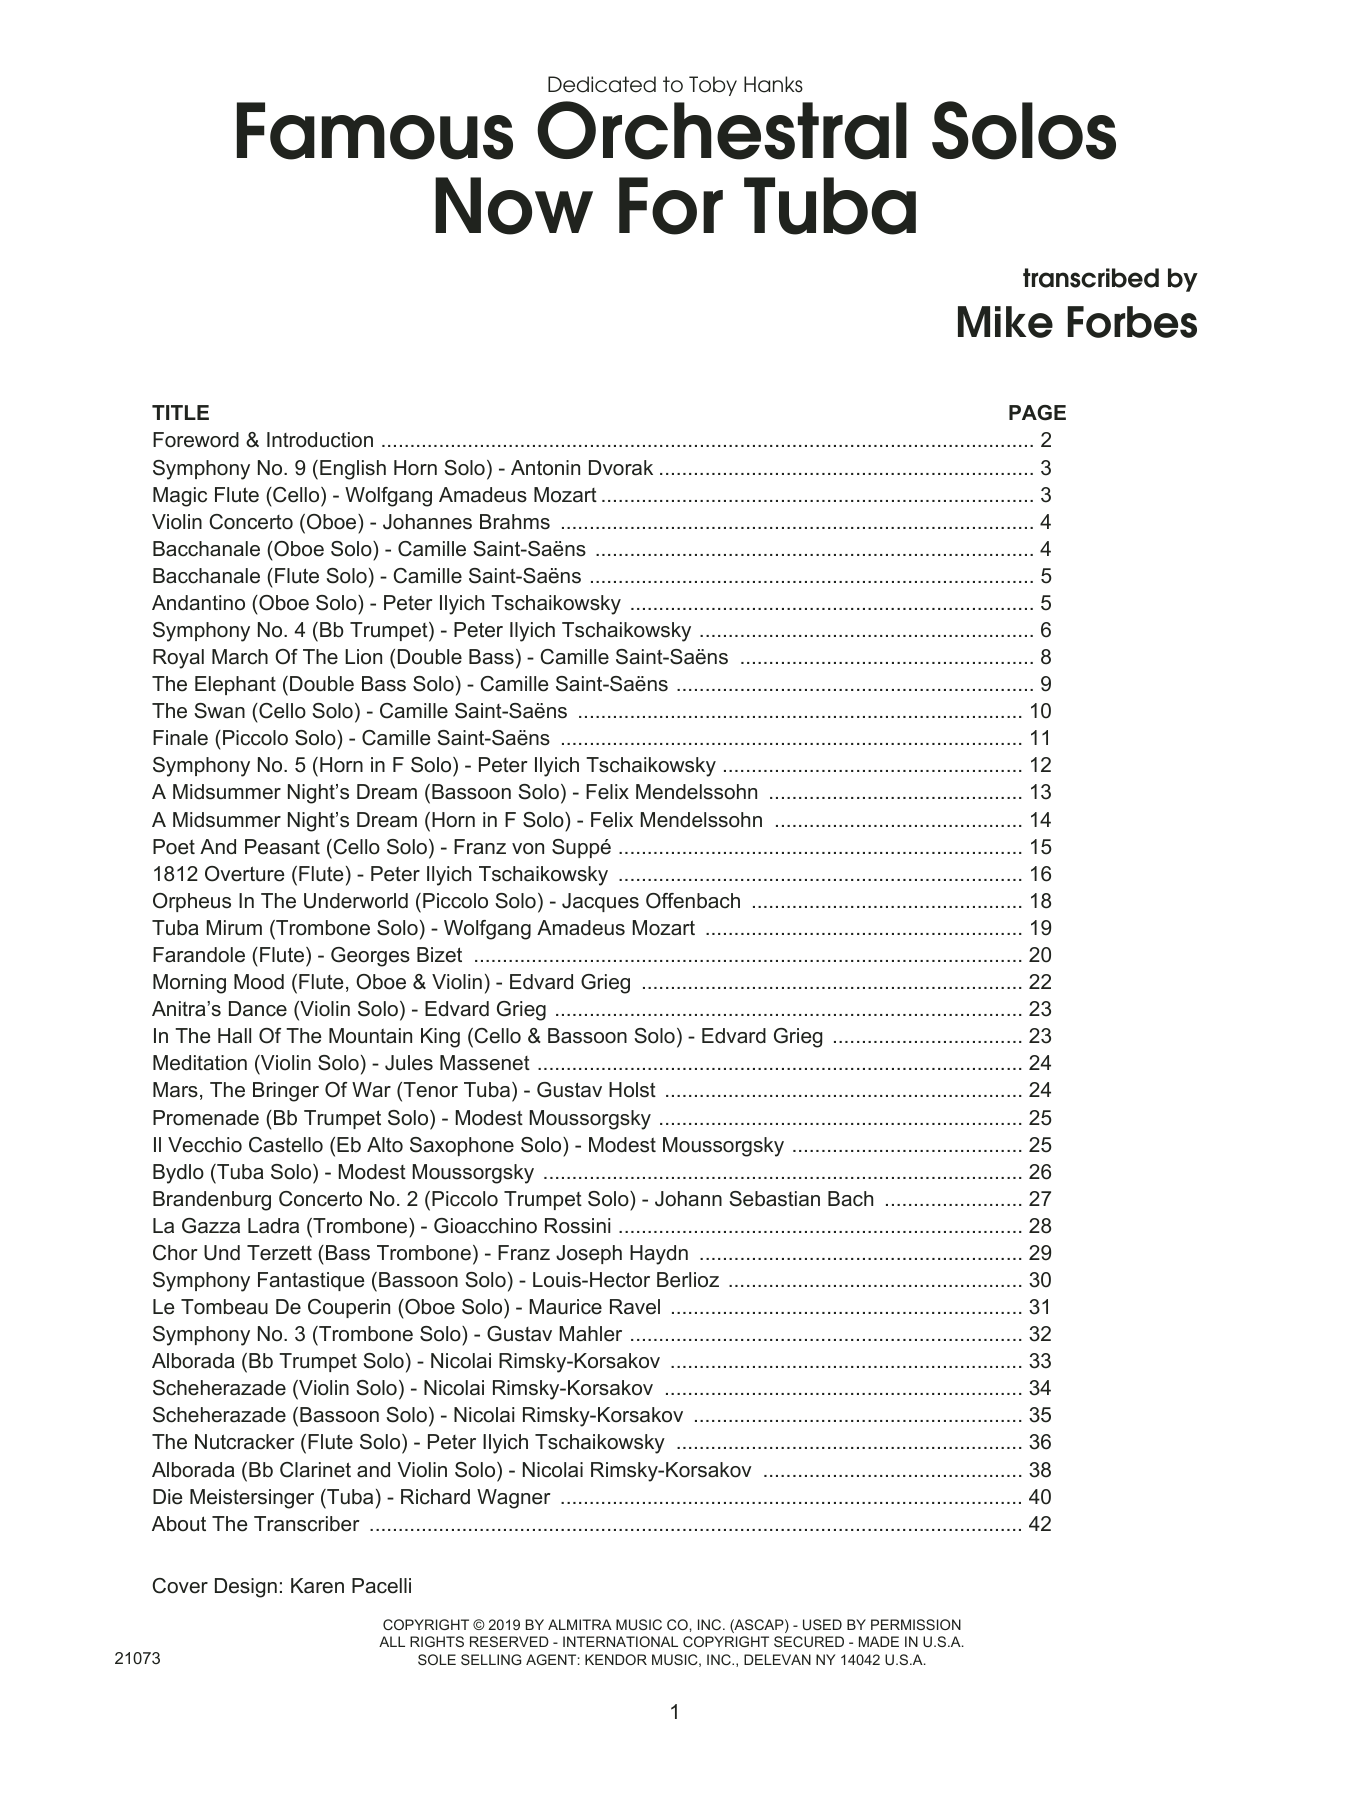 Mike Forbes Famous Orchestral Solos Now For Tuba sheet music preview music notes and score for Brass Solo including 42 page(s)